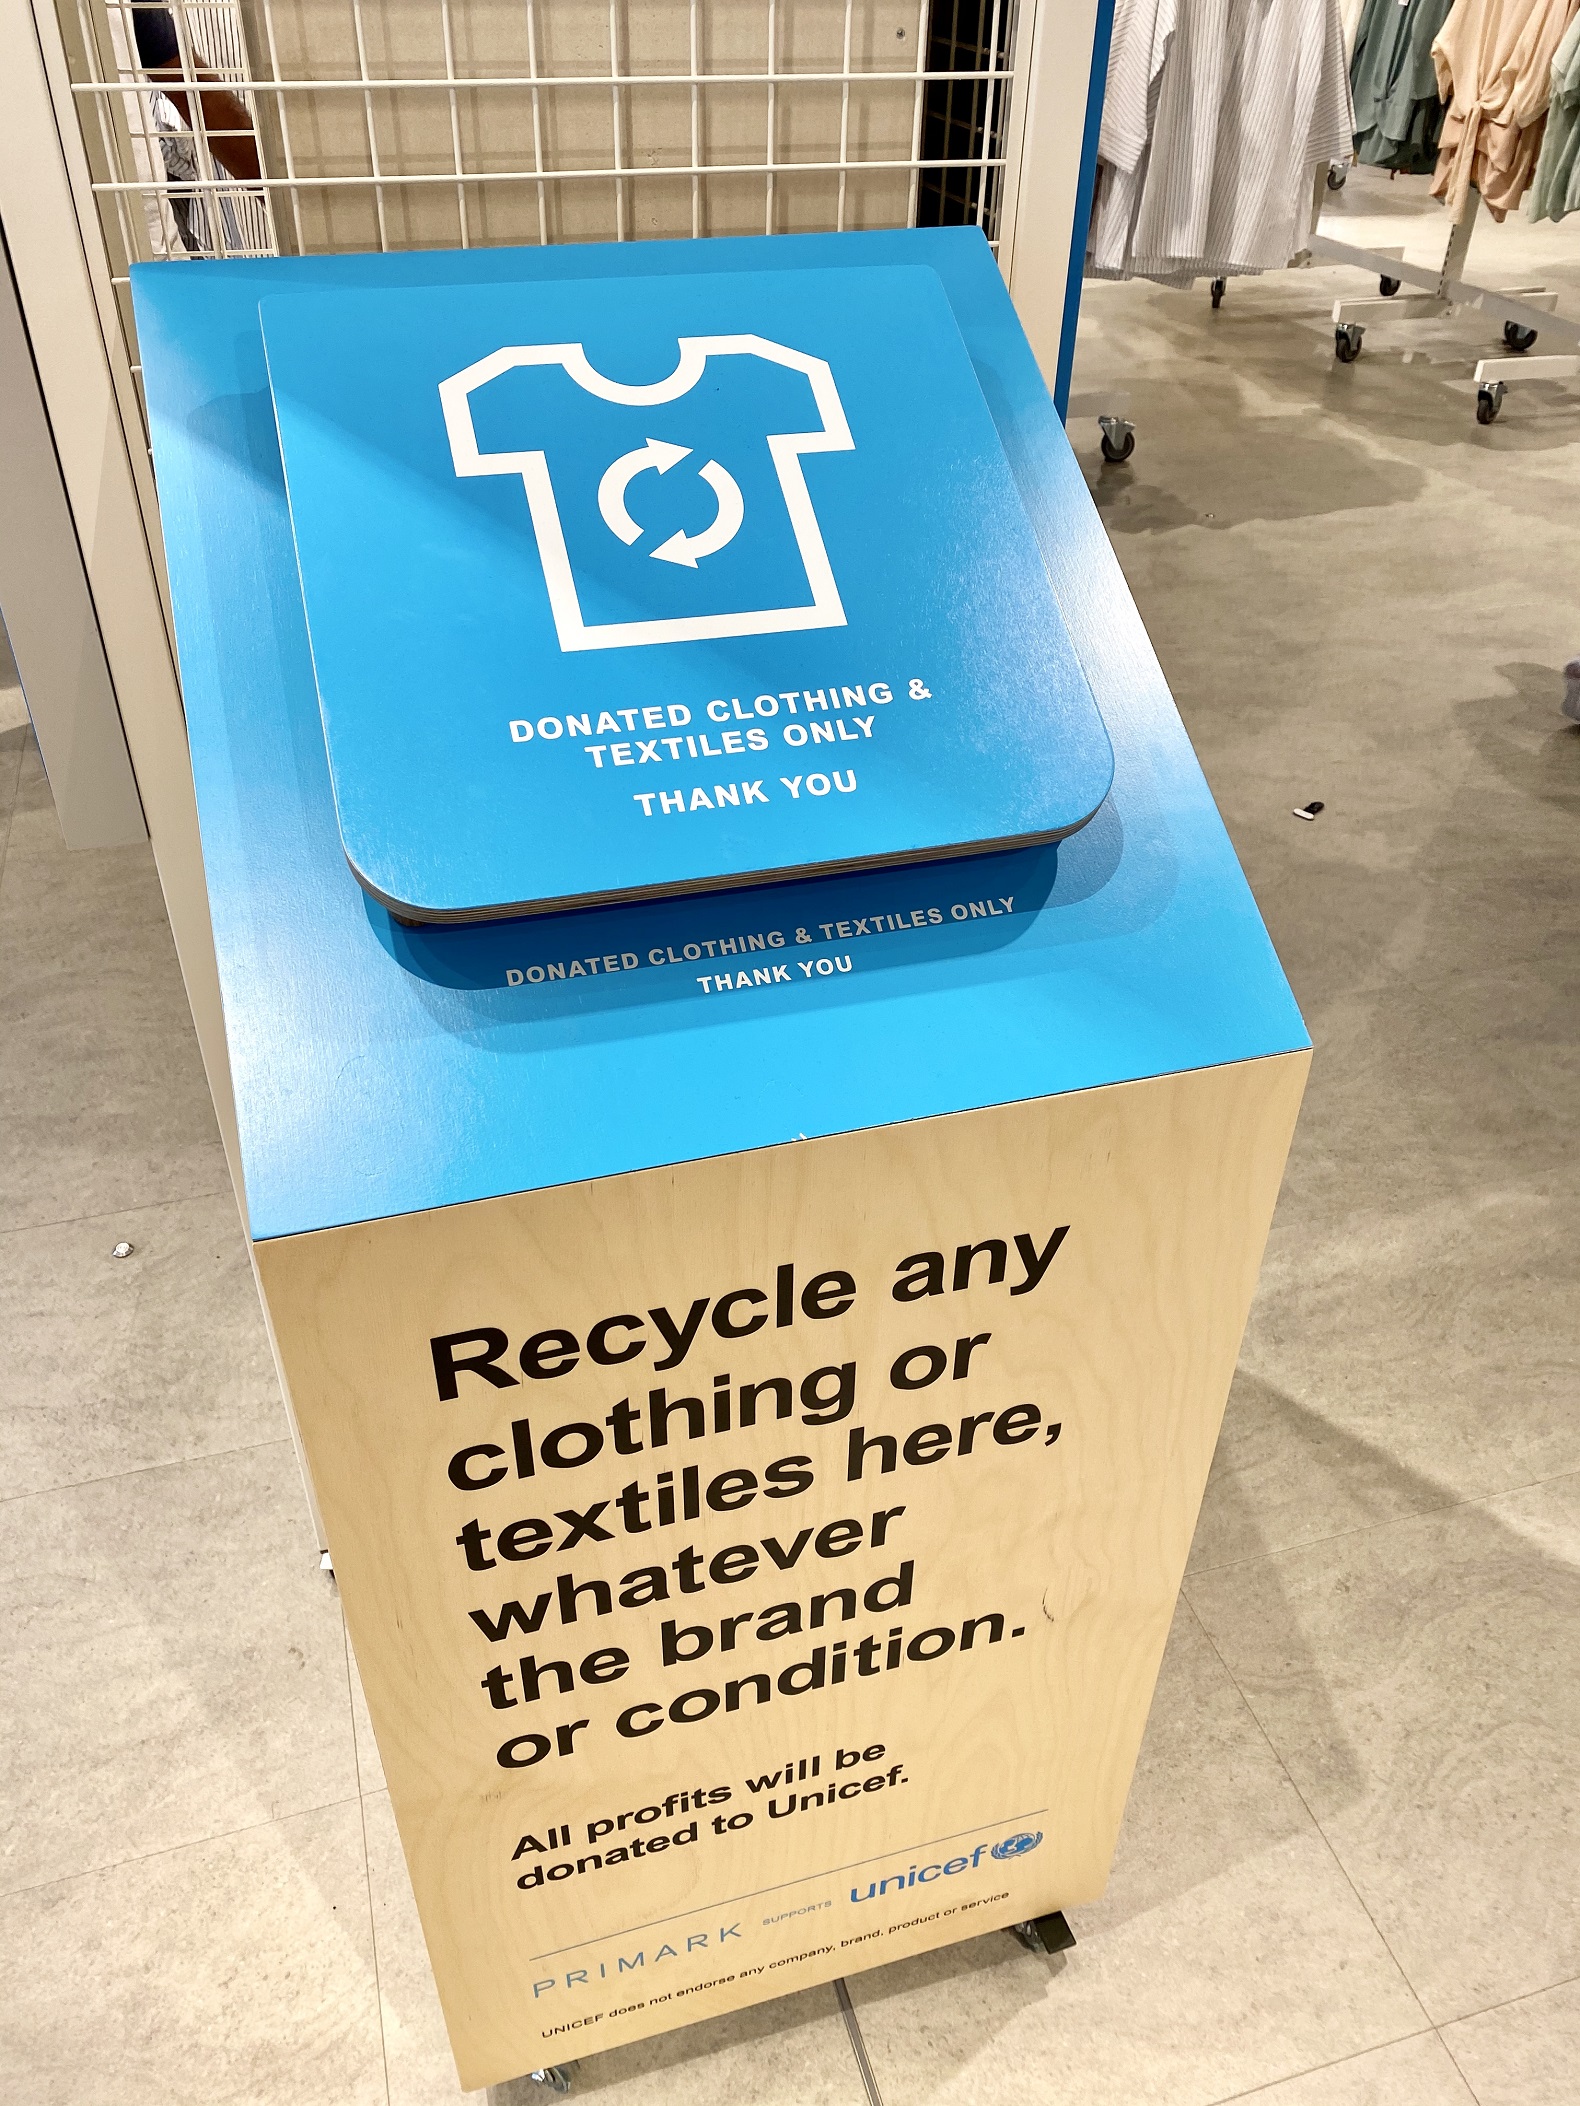 centre:mk on Twitter: "Primark have just launched their In-Store Recycling Scheme, where customers can now recycle any brand of pre-loved clothing or textiles.💚 All donated items will be reused, recycled or repurposed,